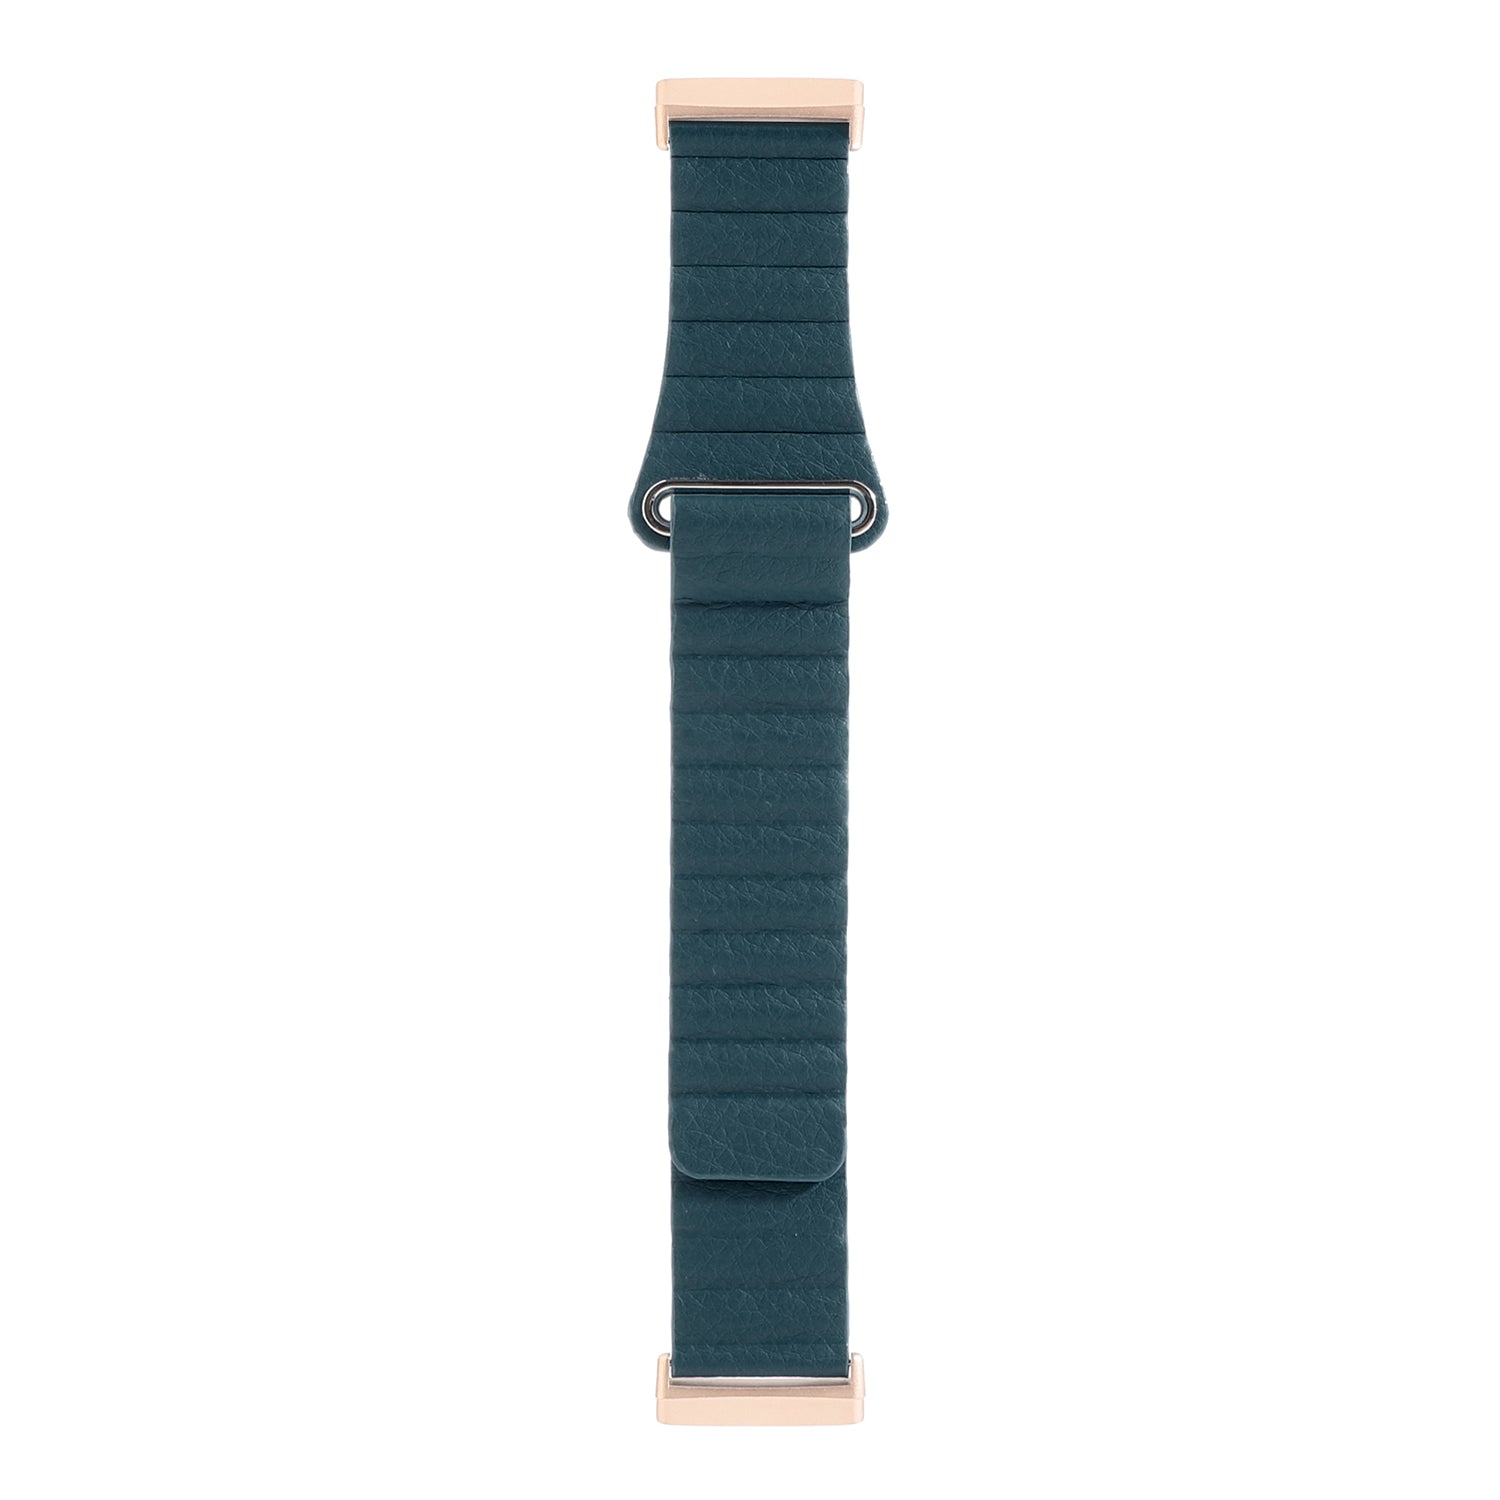 Genuine Leather Watchband Replacement 22mm for Fitbit Versa 3 - Dark Green